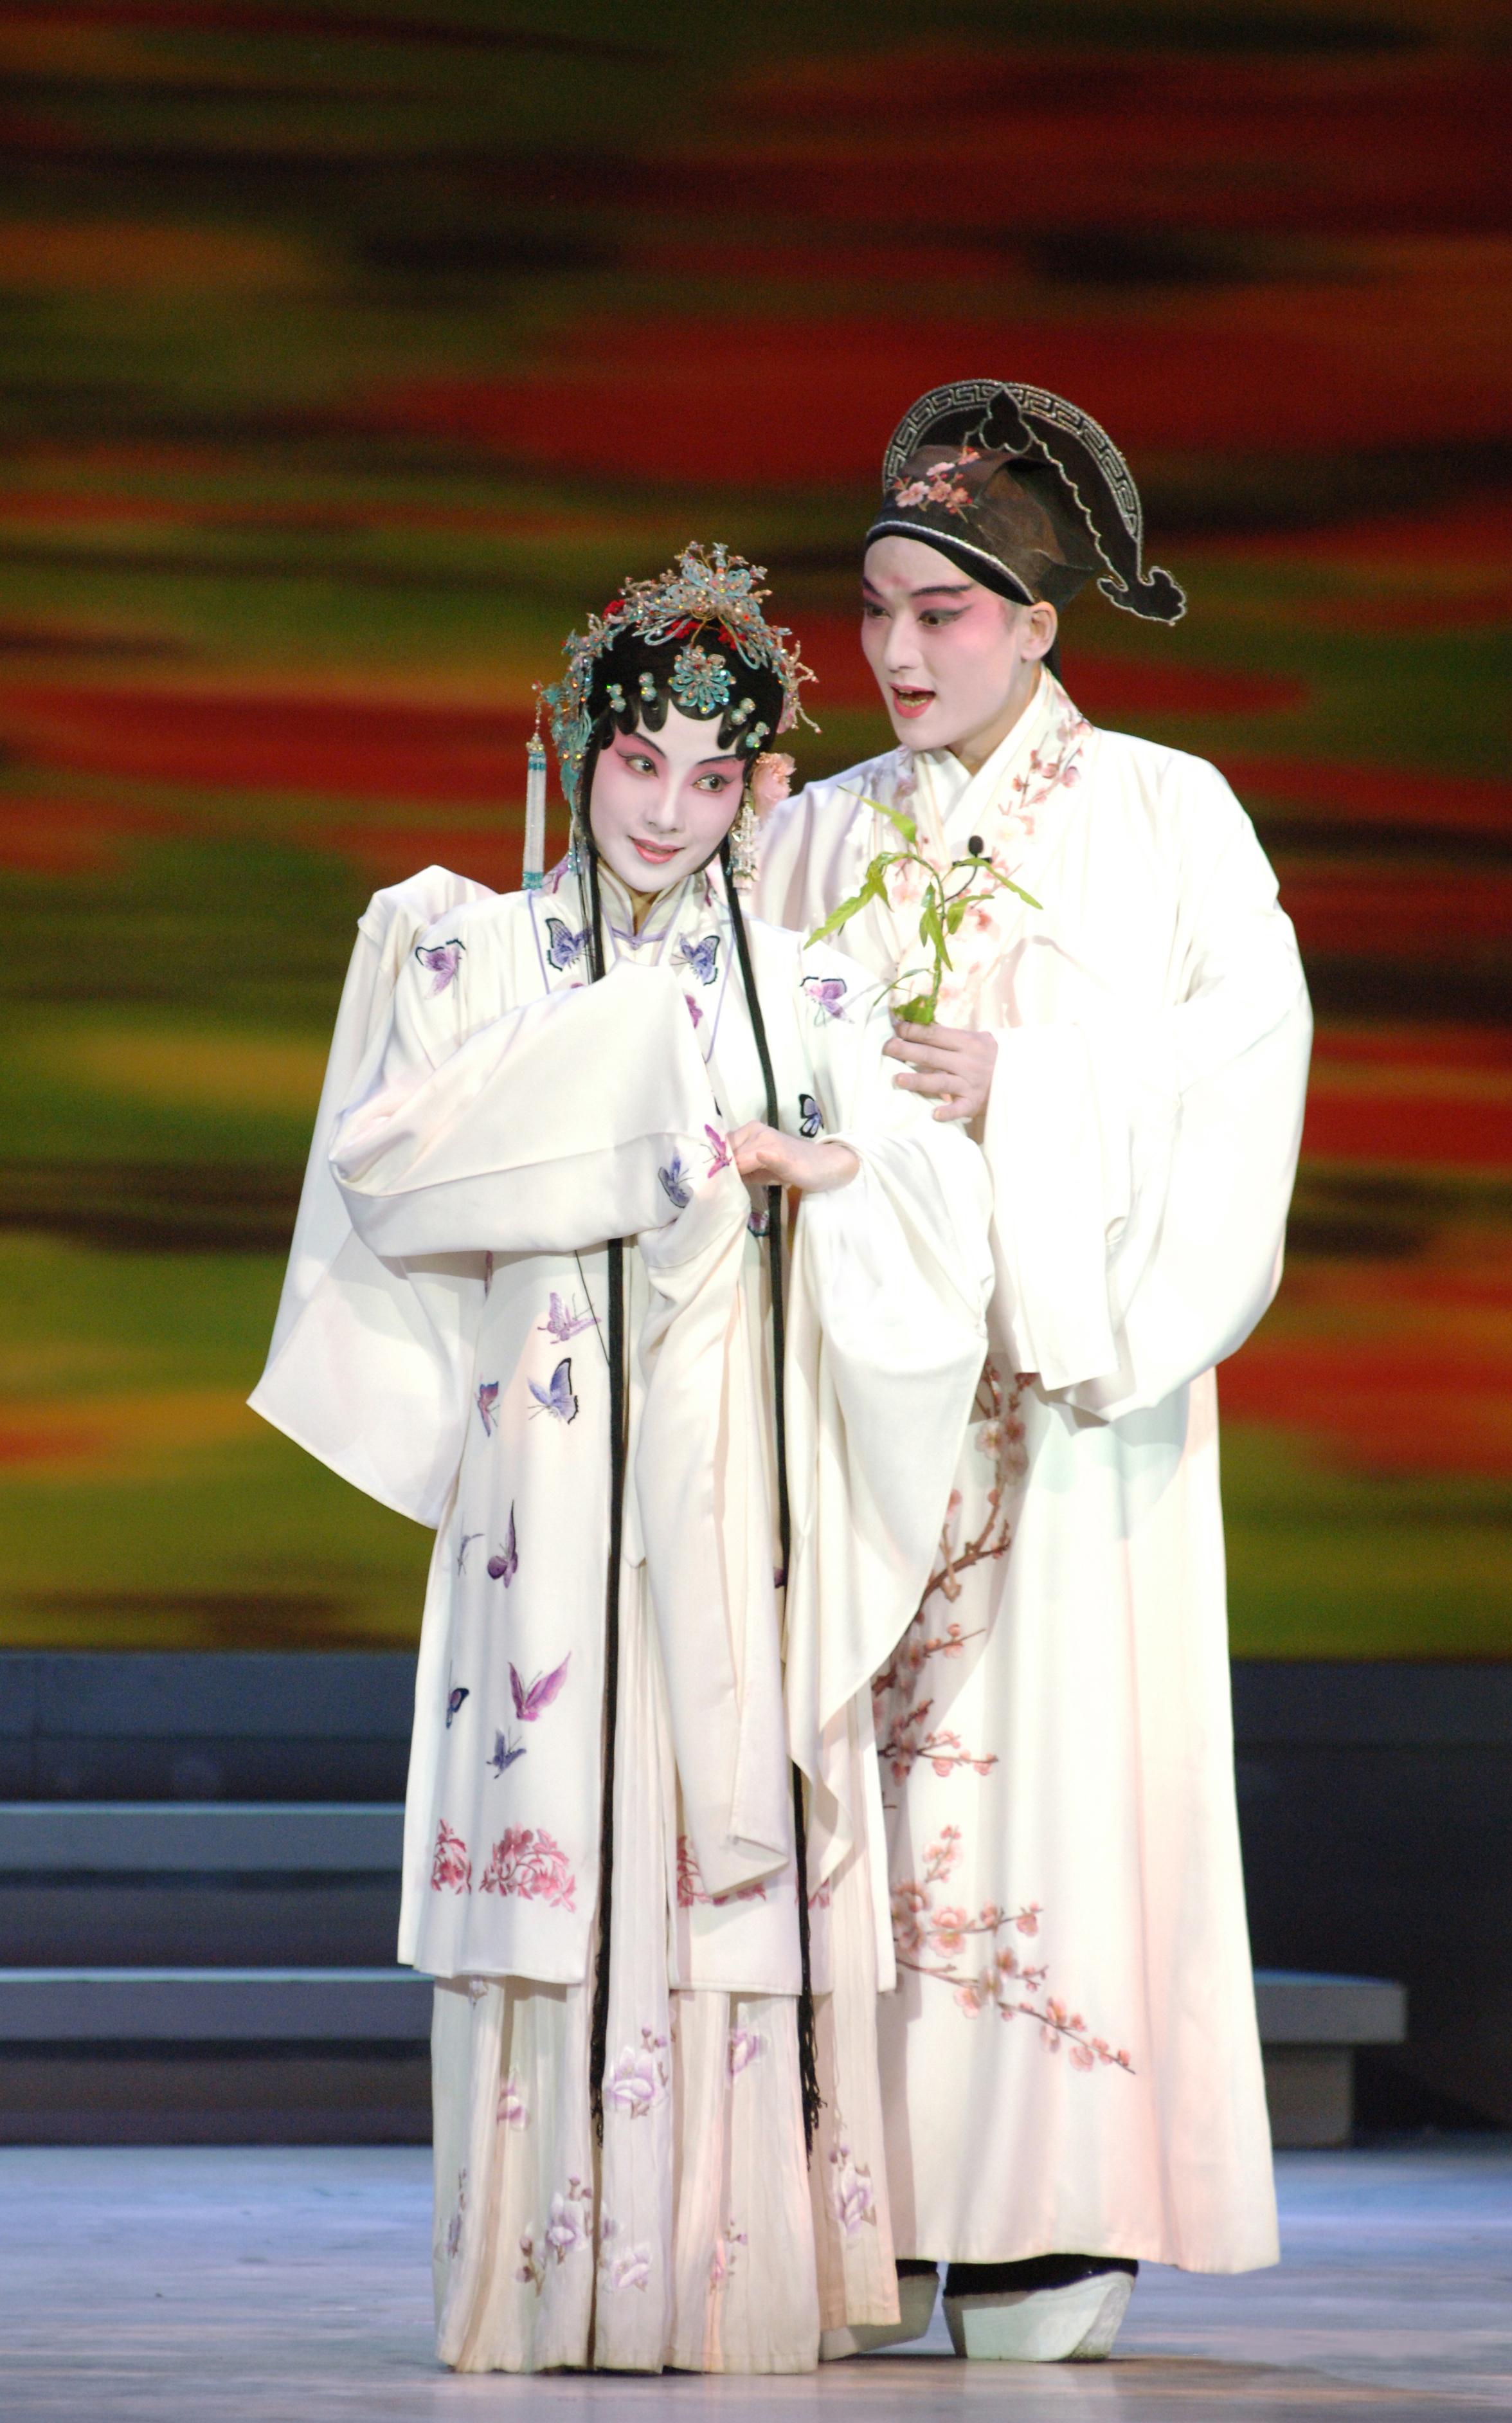 The Suzhou Kunqu Opera Theatre of Jiangsu will present "'The Peony Pavilion' - The Youth Version" at the Chinese Opera Festival 2023 in July, featuring the original cast. Photo shows a scene of Part One: "Love in a Dream".